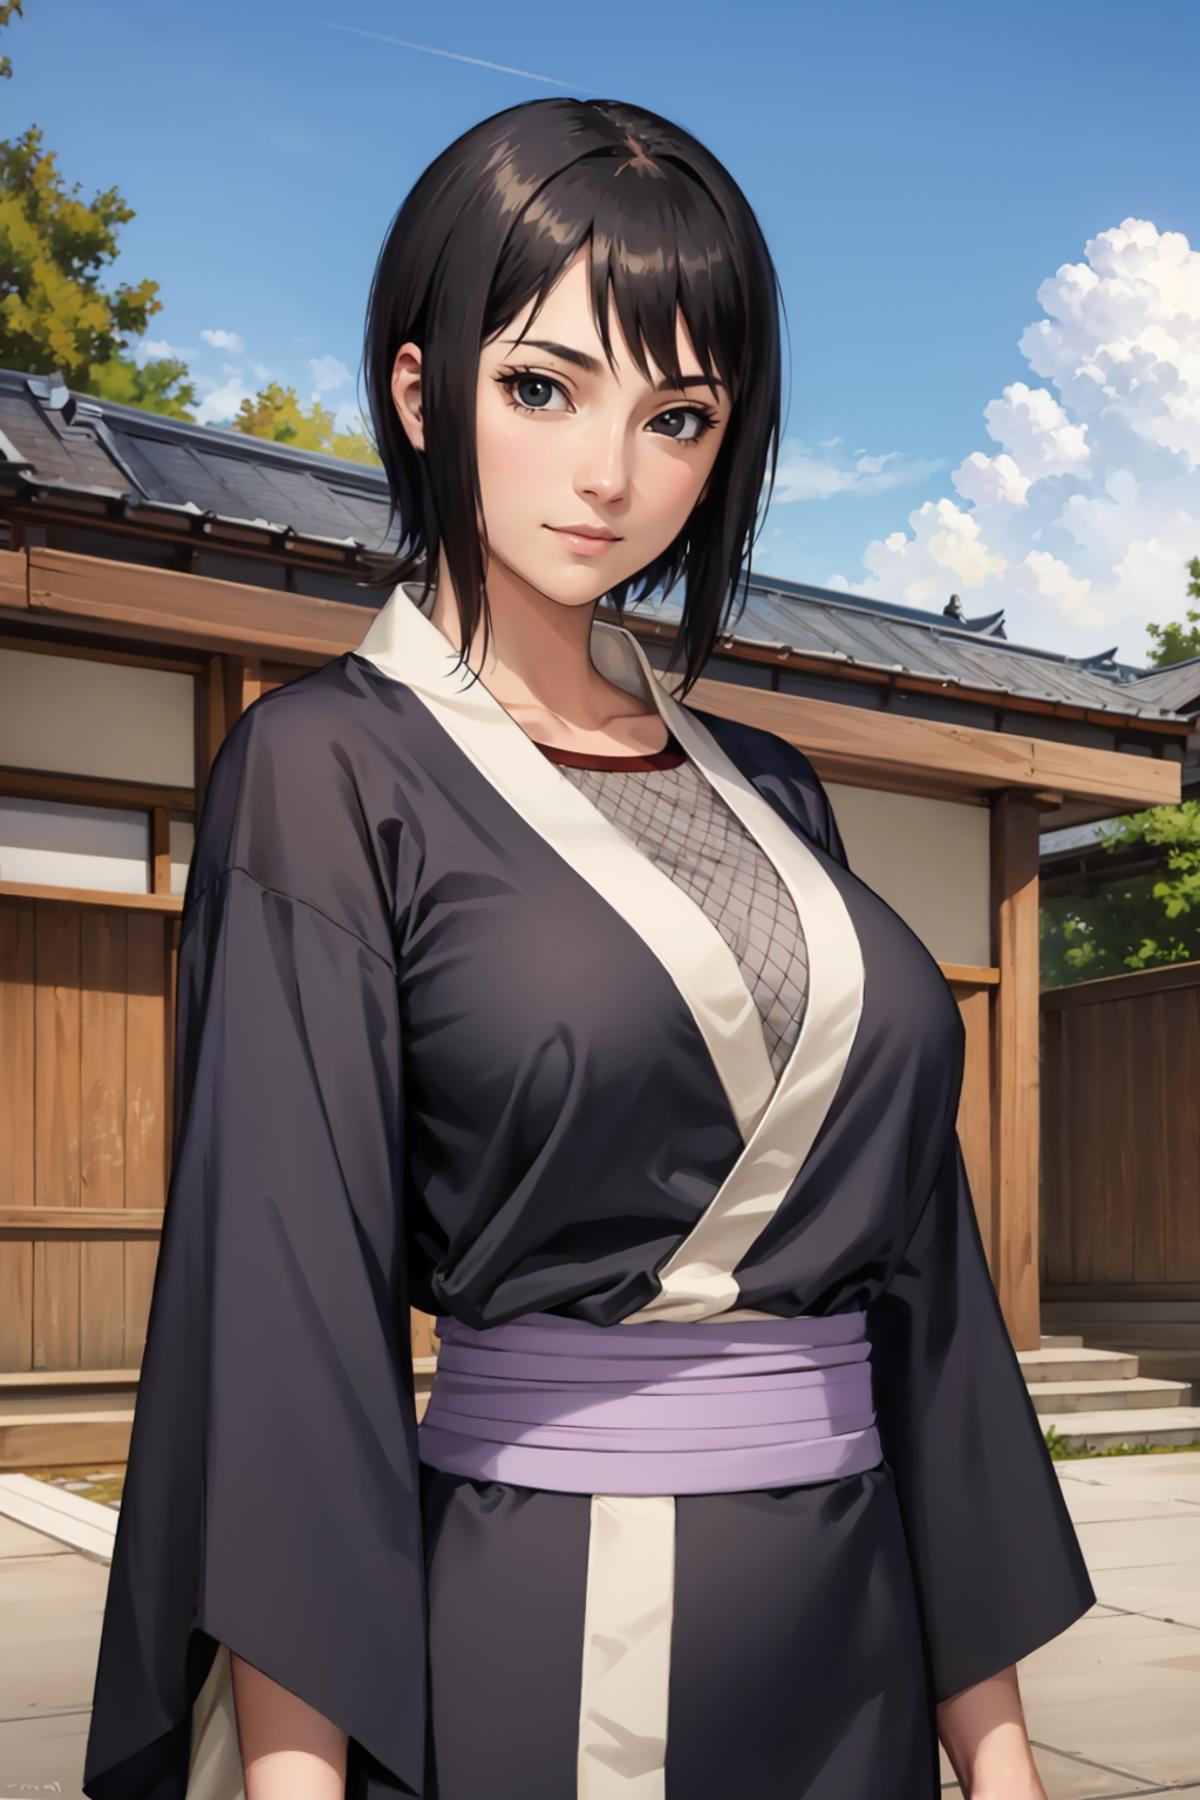 Anime-style character wearing a black and white kimono with a purple belt.